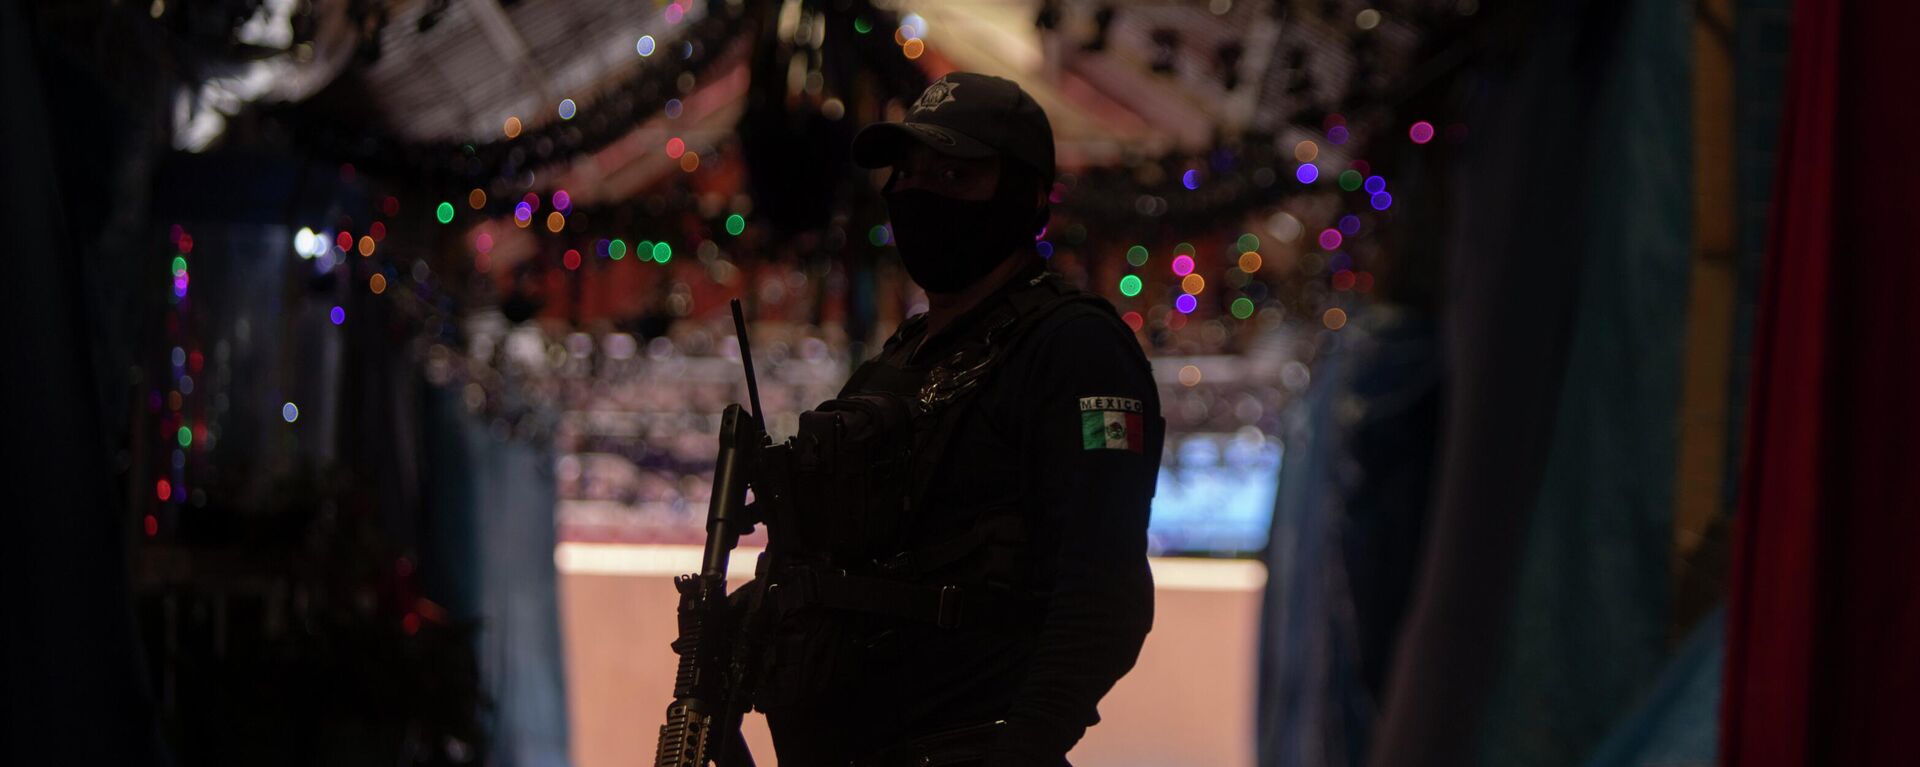 A police officer stand near the area of a massive shootout in Parangaricutiro, Mexico,Thursday, March 10, 2022. Authorities in the avocado-growing zone of western Mexico said five suspected drug cartel gunmen have been killed in a massive firefight between gangs. - Sputnik International, 1920, 06.08.2022